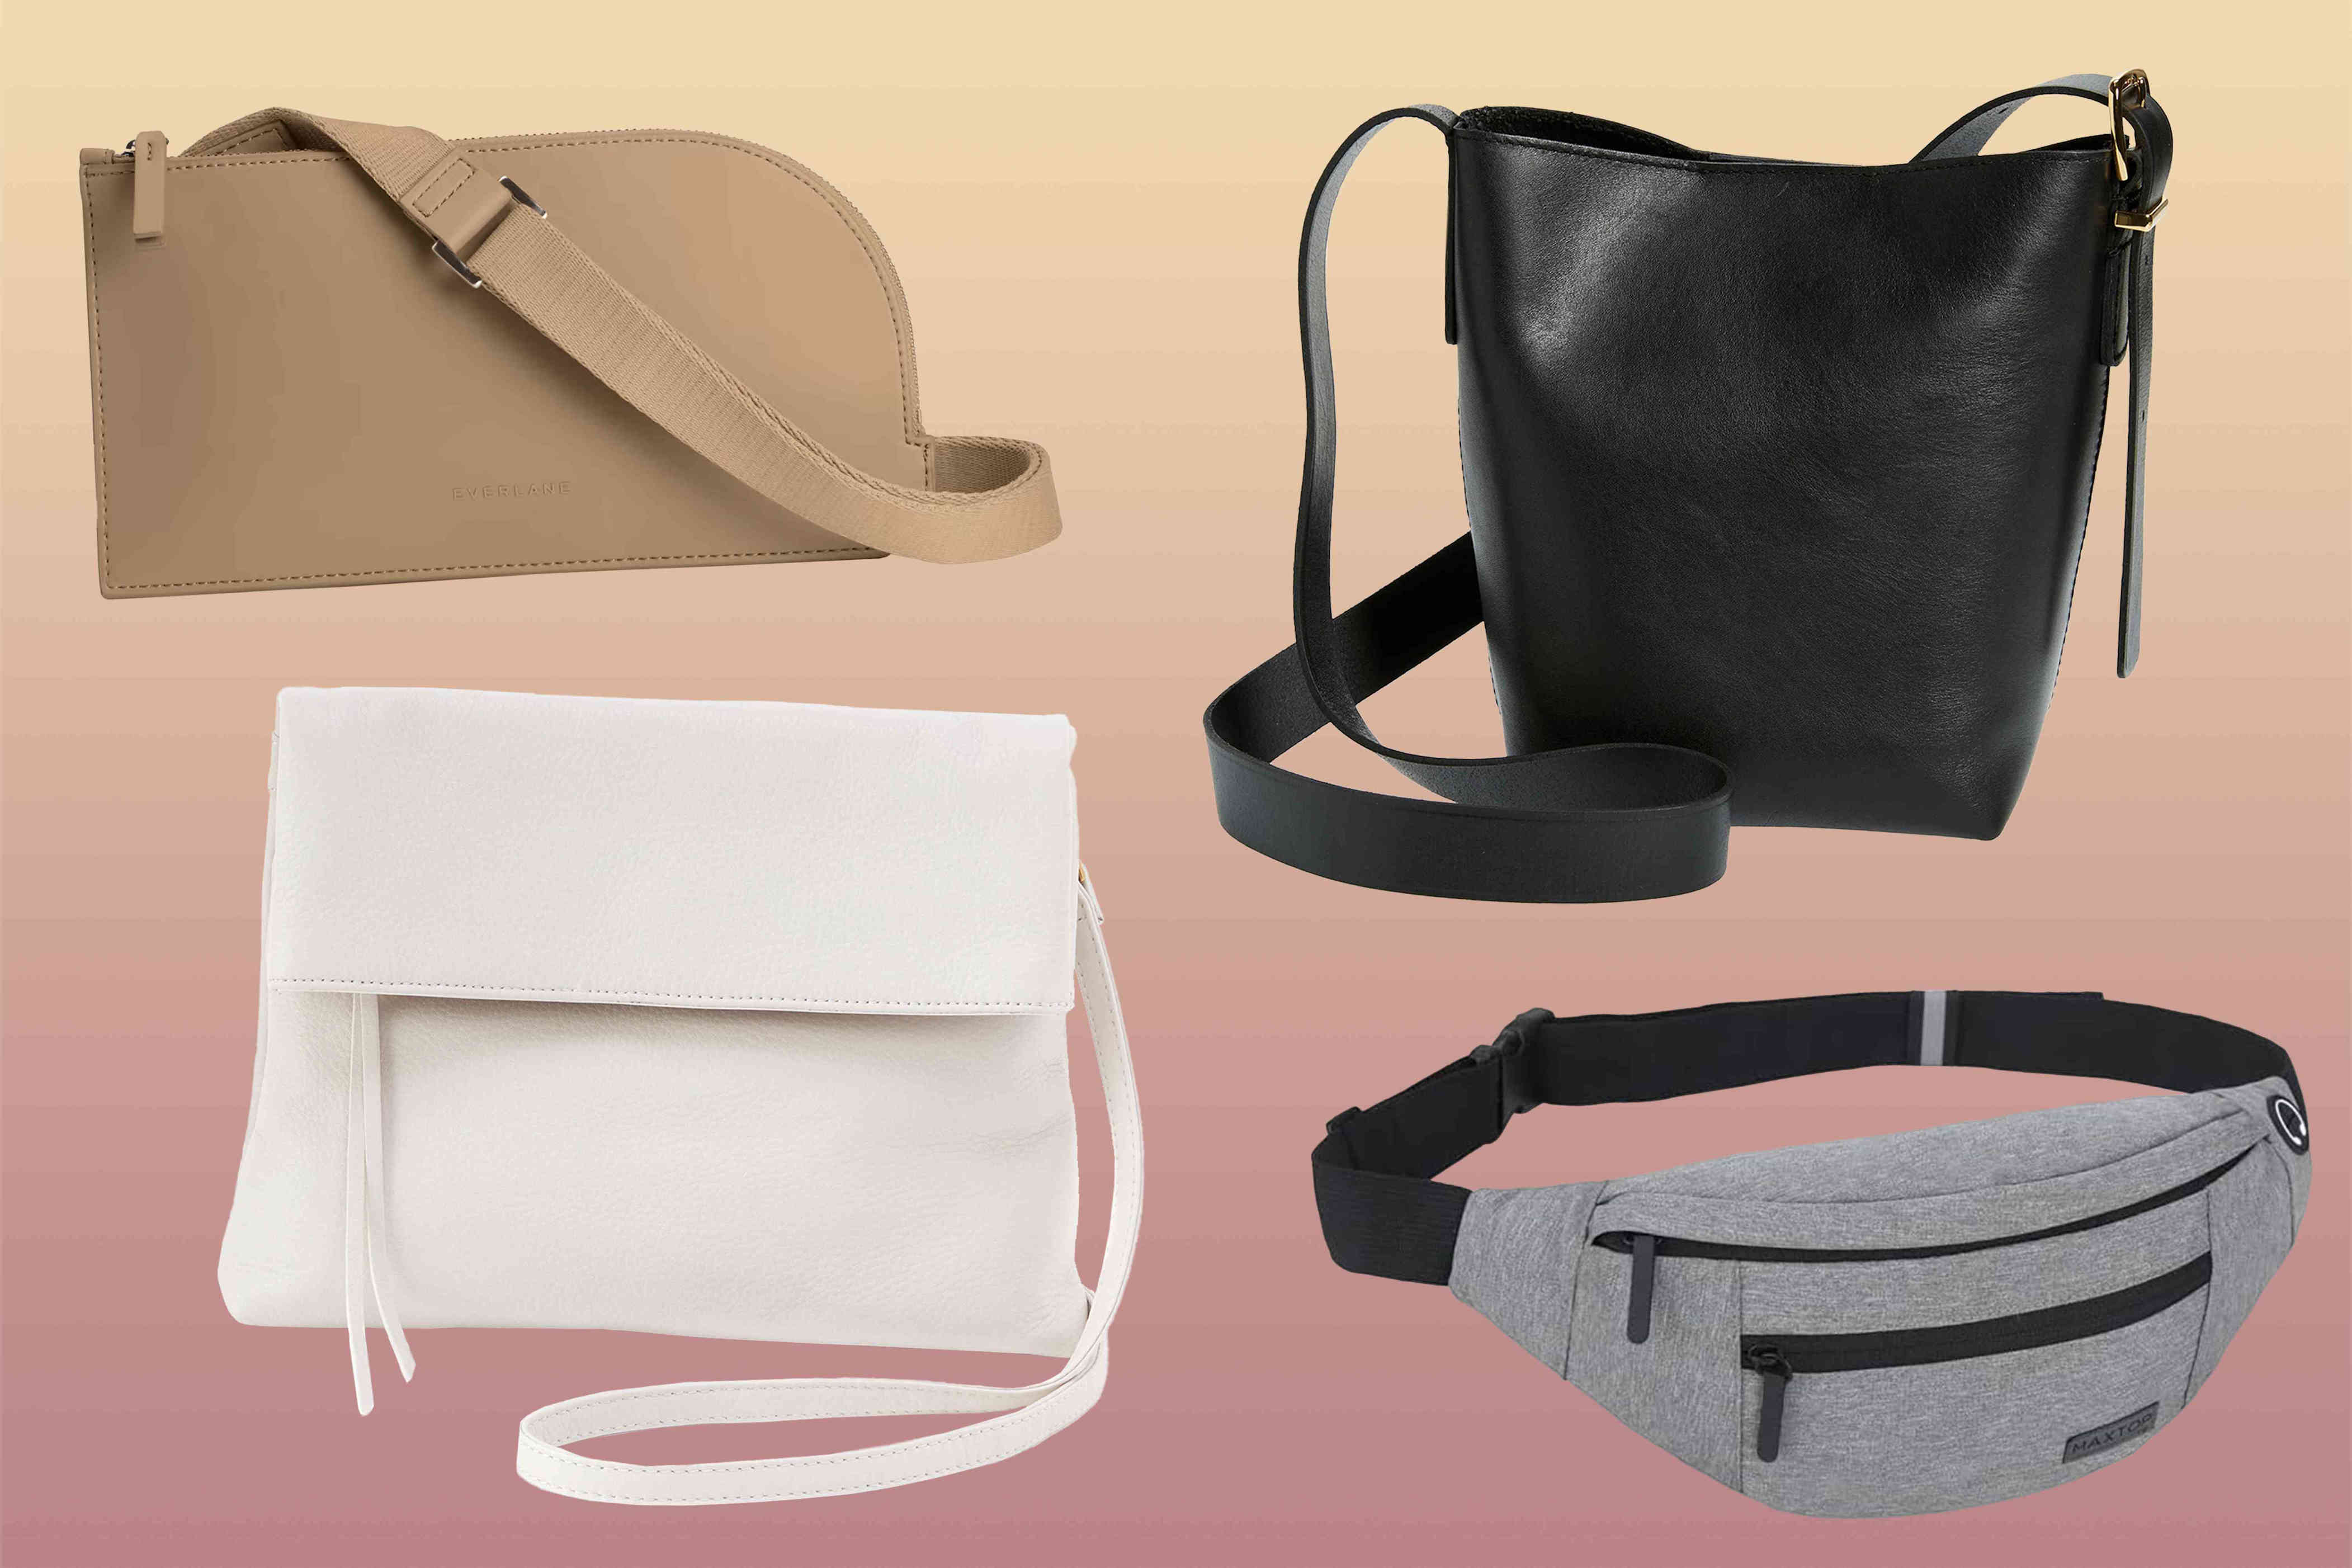 amazon, travel light with the 15 best sleek and stylish crossbody purses, sling bags, and more — from $14